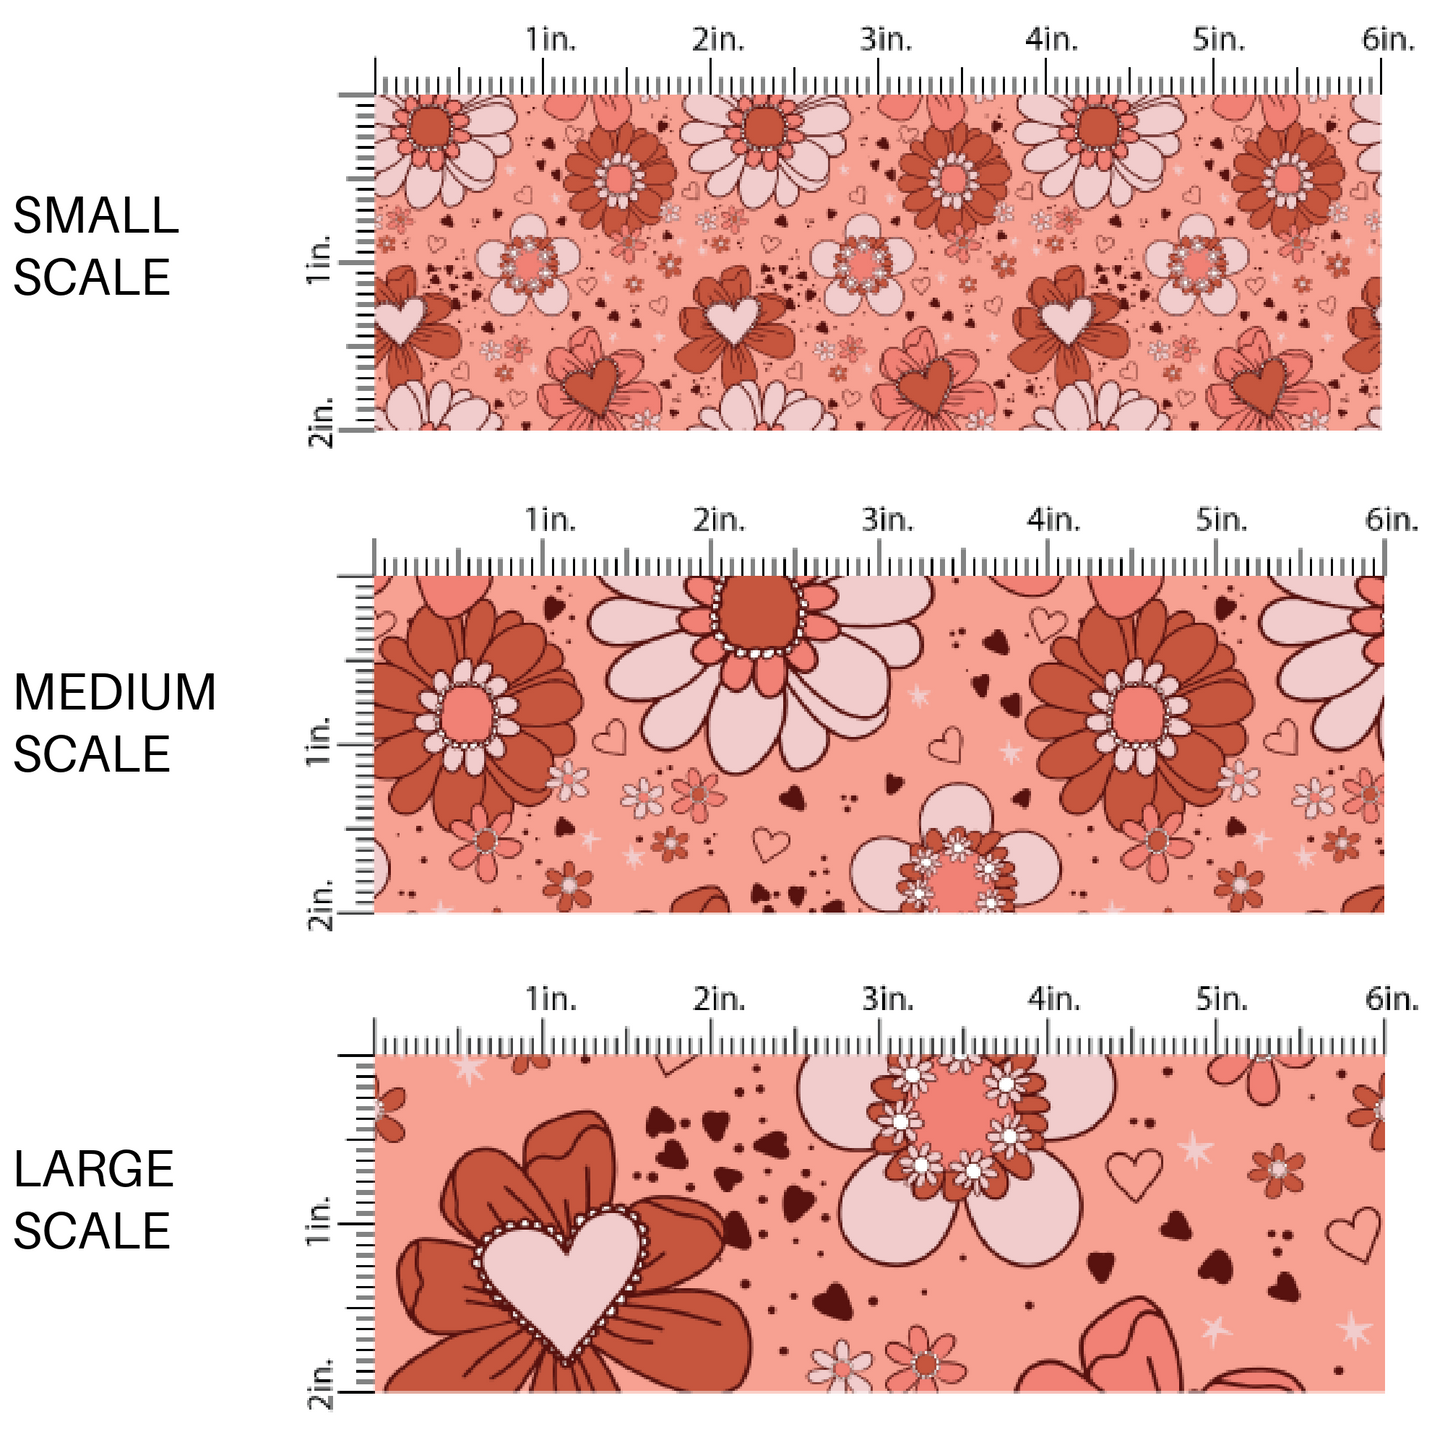 Pink Fabric image guide with hearts and floral prints and patterns - Fabric scaling sizes 